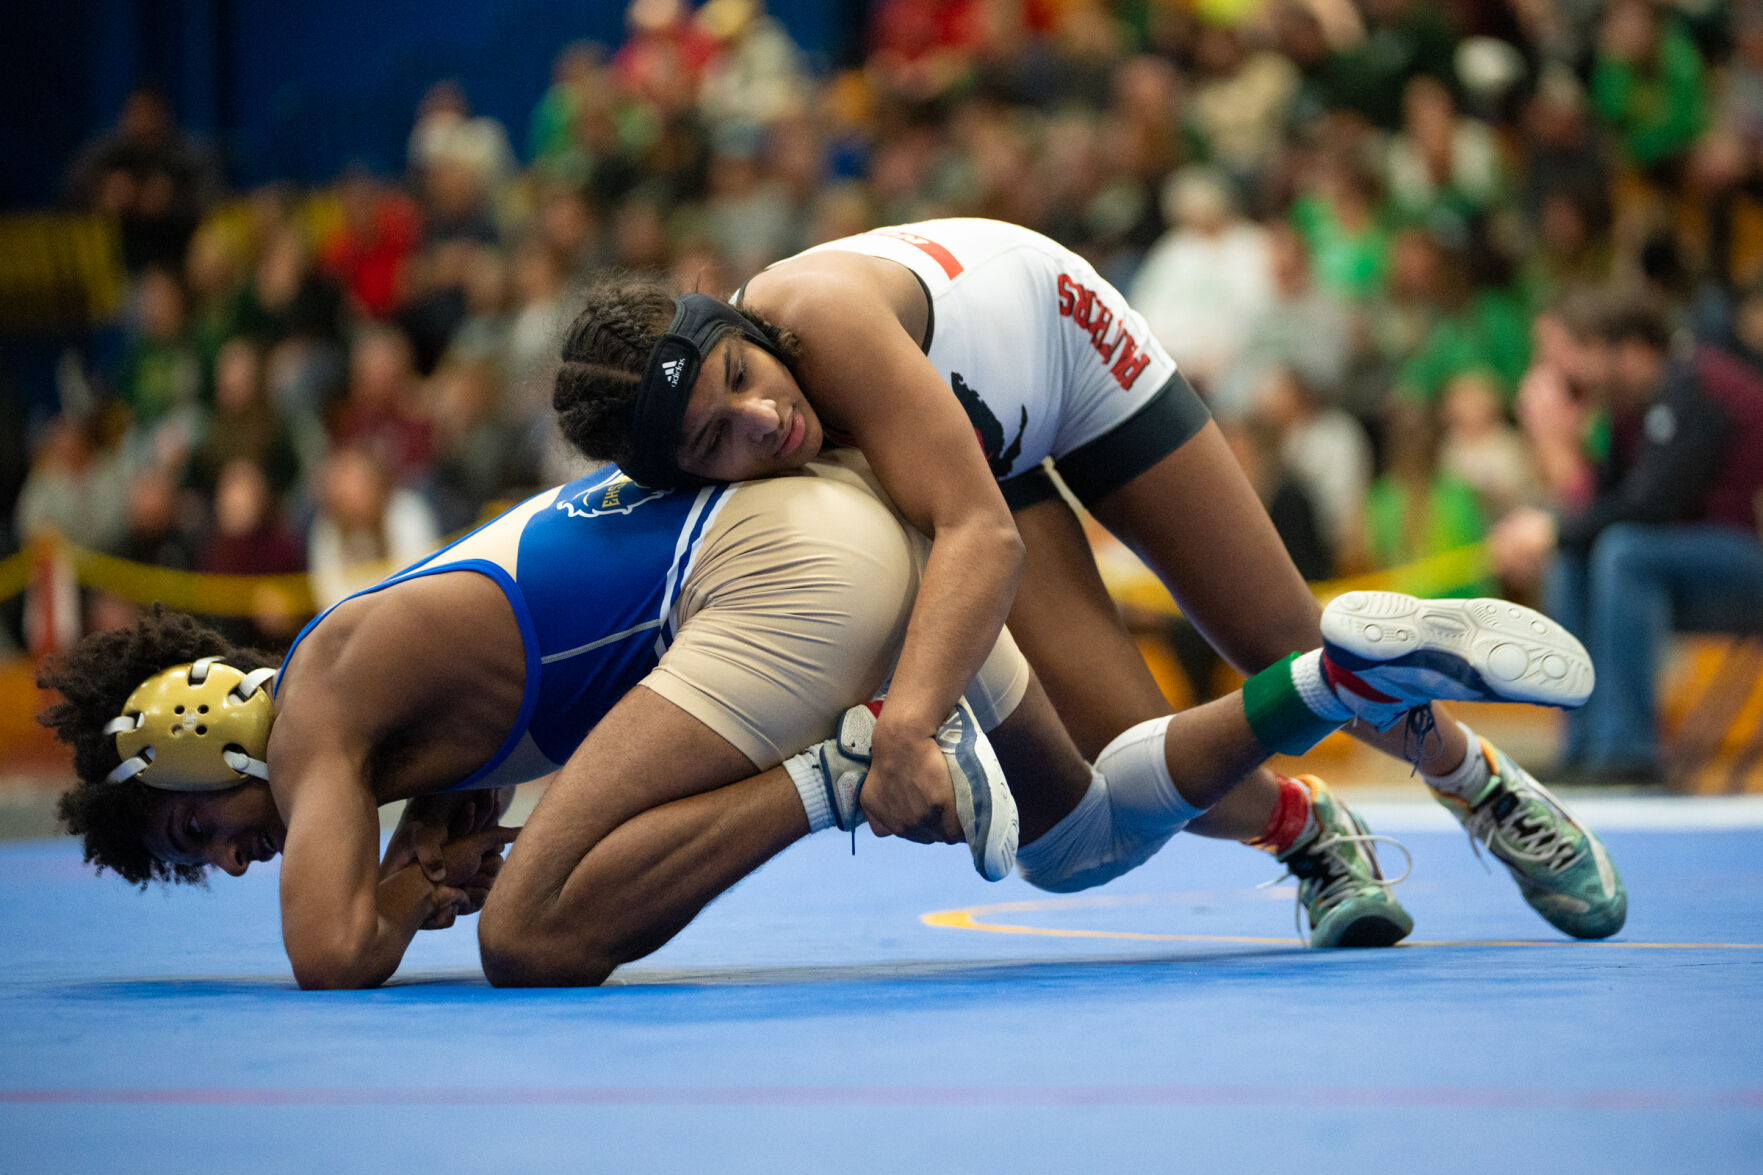 IHSAA officially recognizes girls wrestling and boys volleyball as sanctioned sports